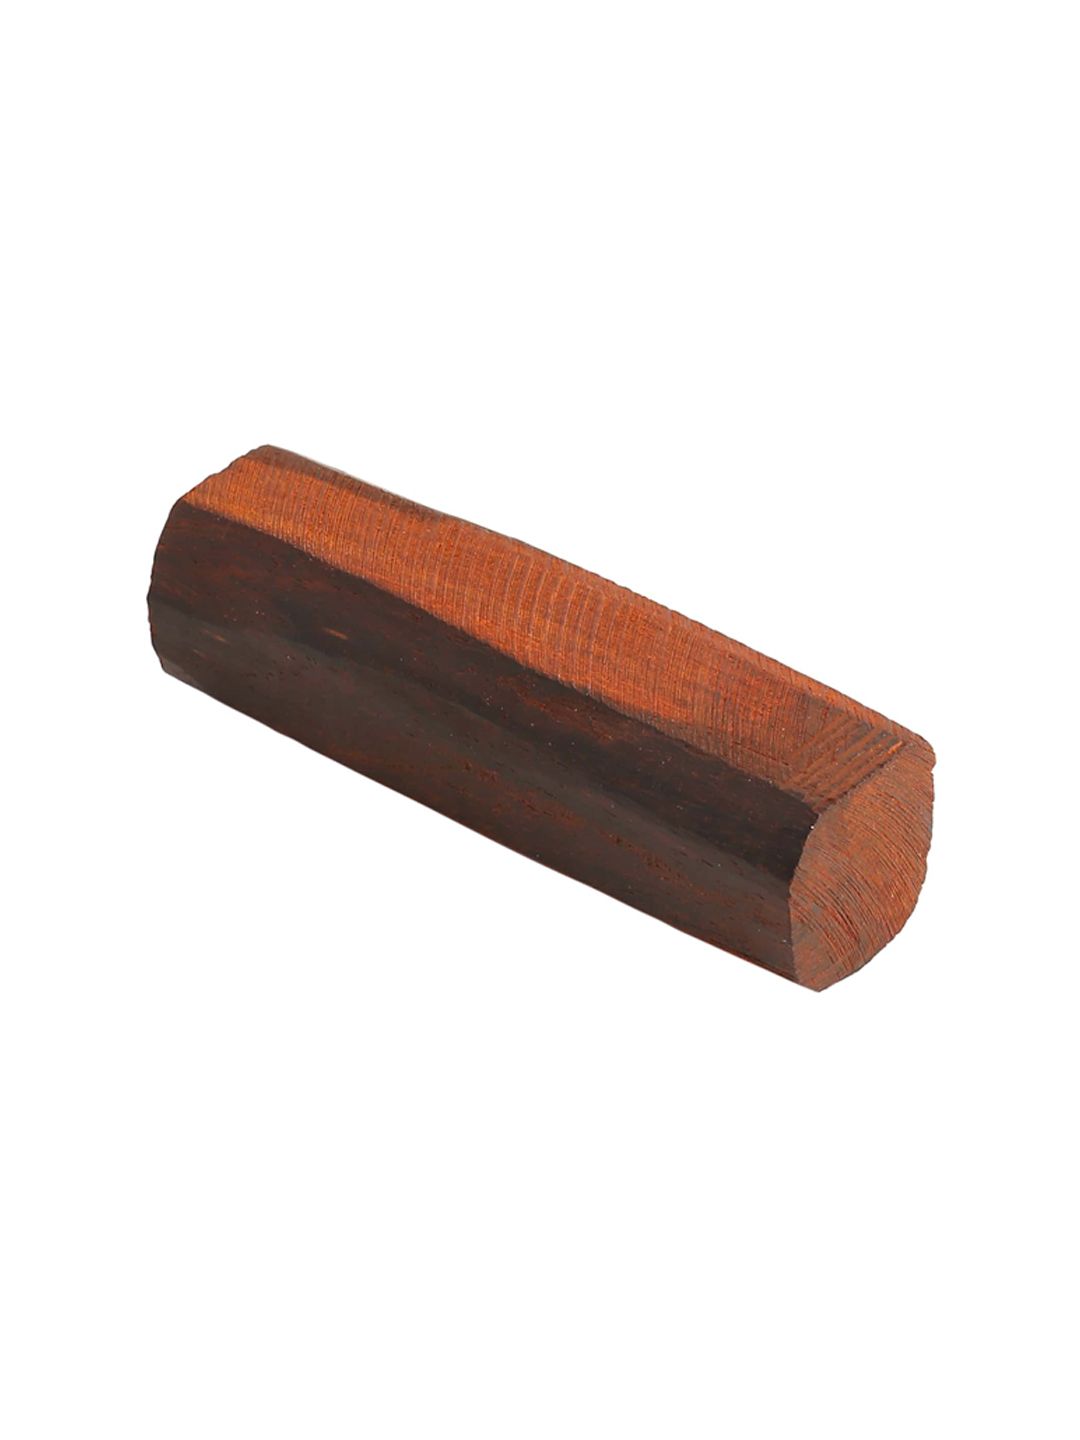 RDK Red Sandalwood With Rubbing Board Price in India